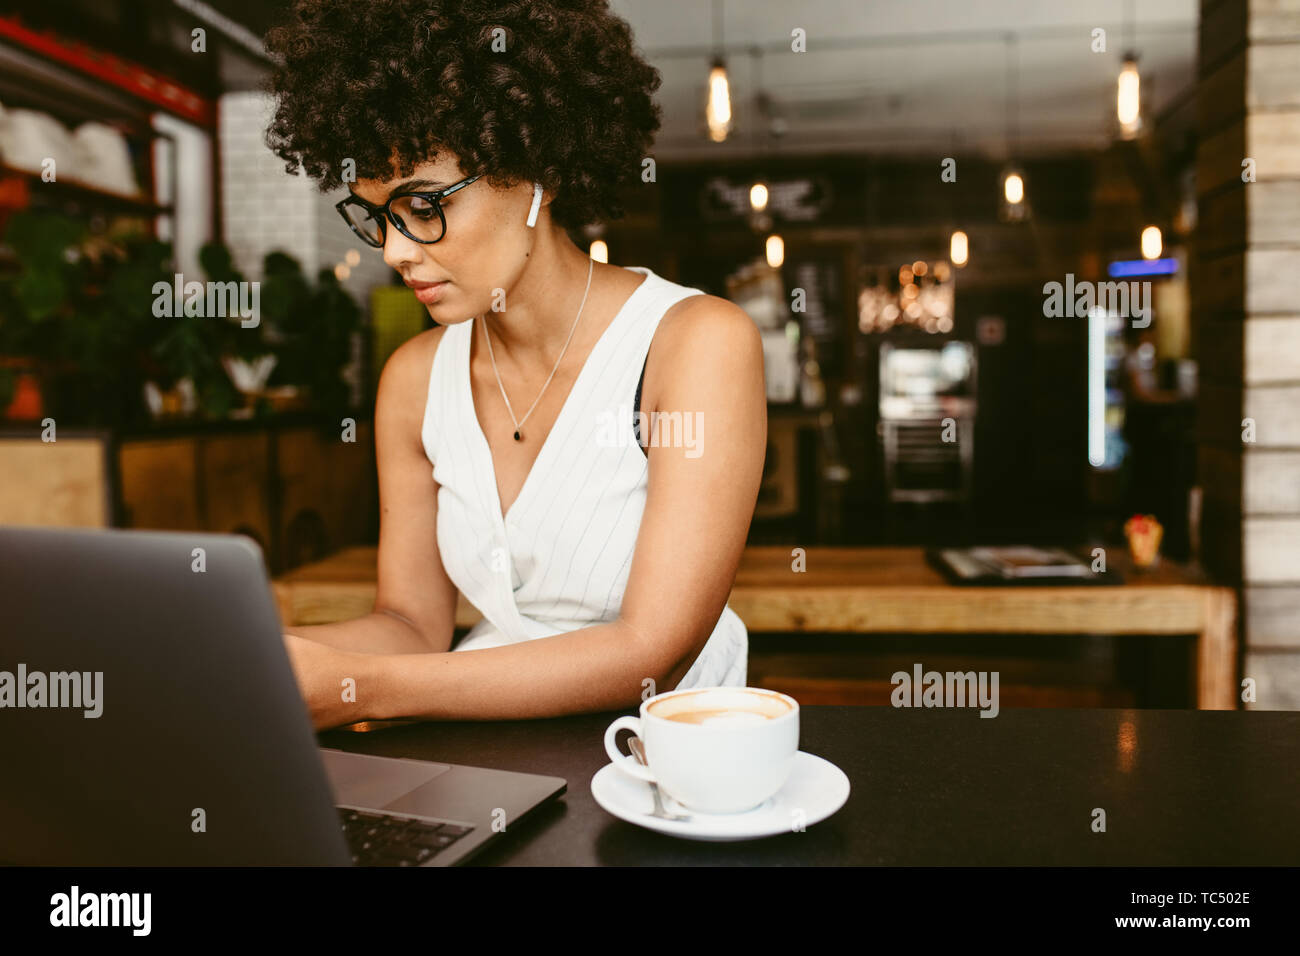 African woman sitting at cafe with laptop and cup of coffee on table. Young woman working at a cafe. Stock Photo